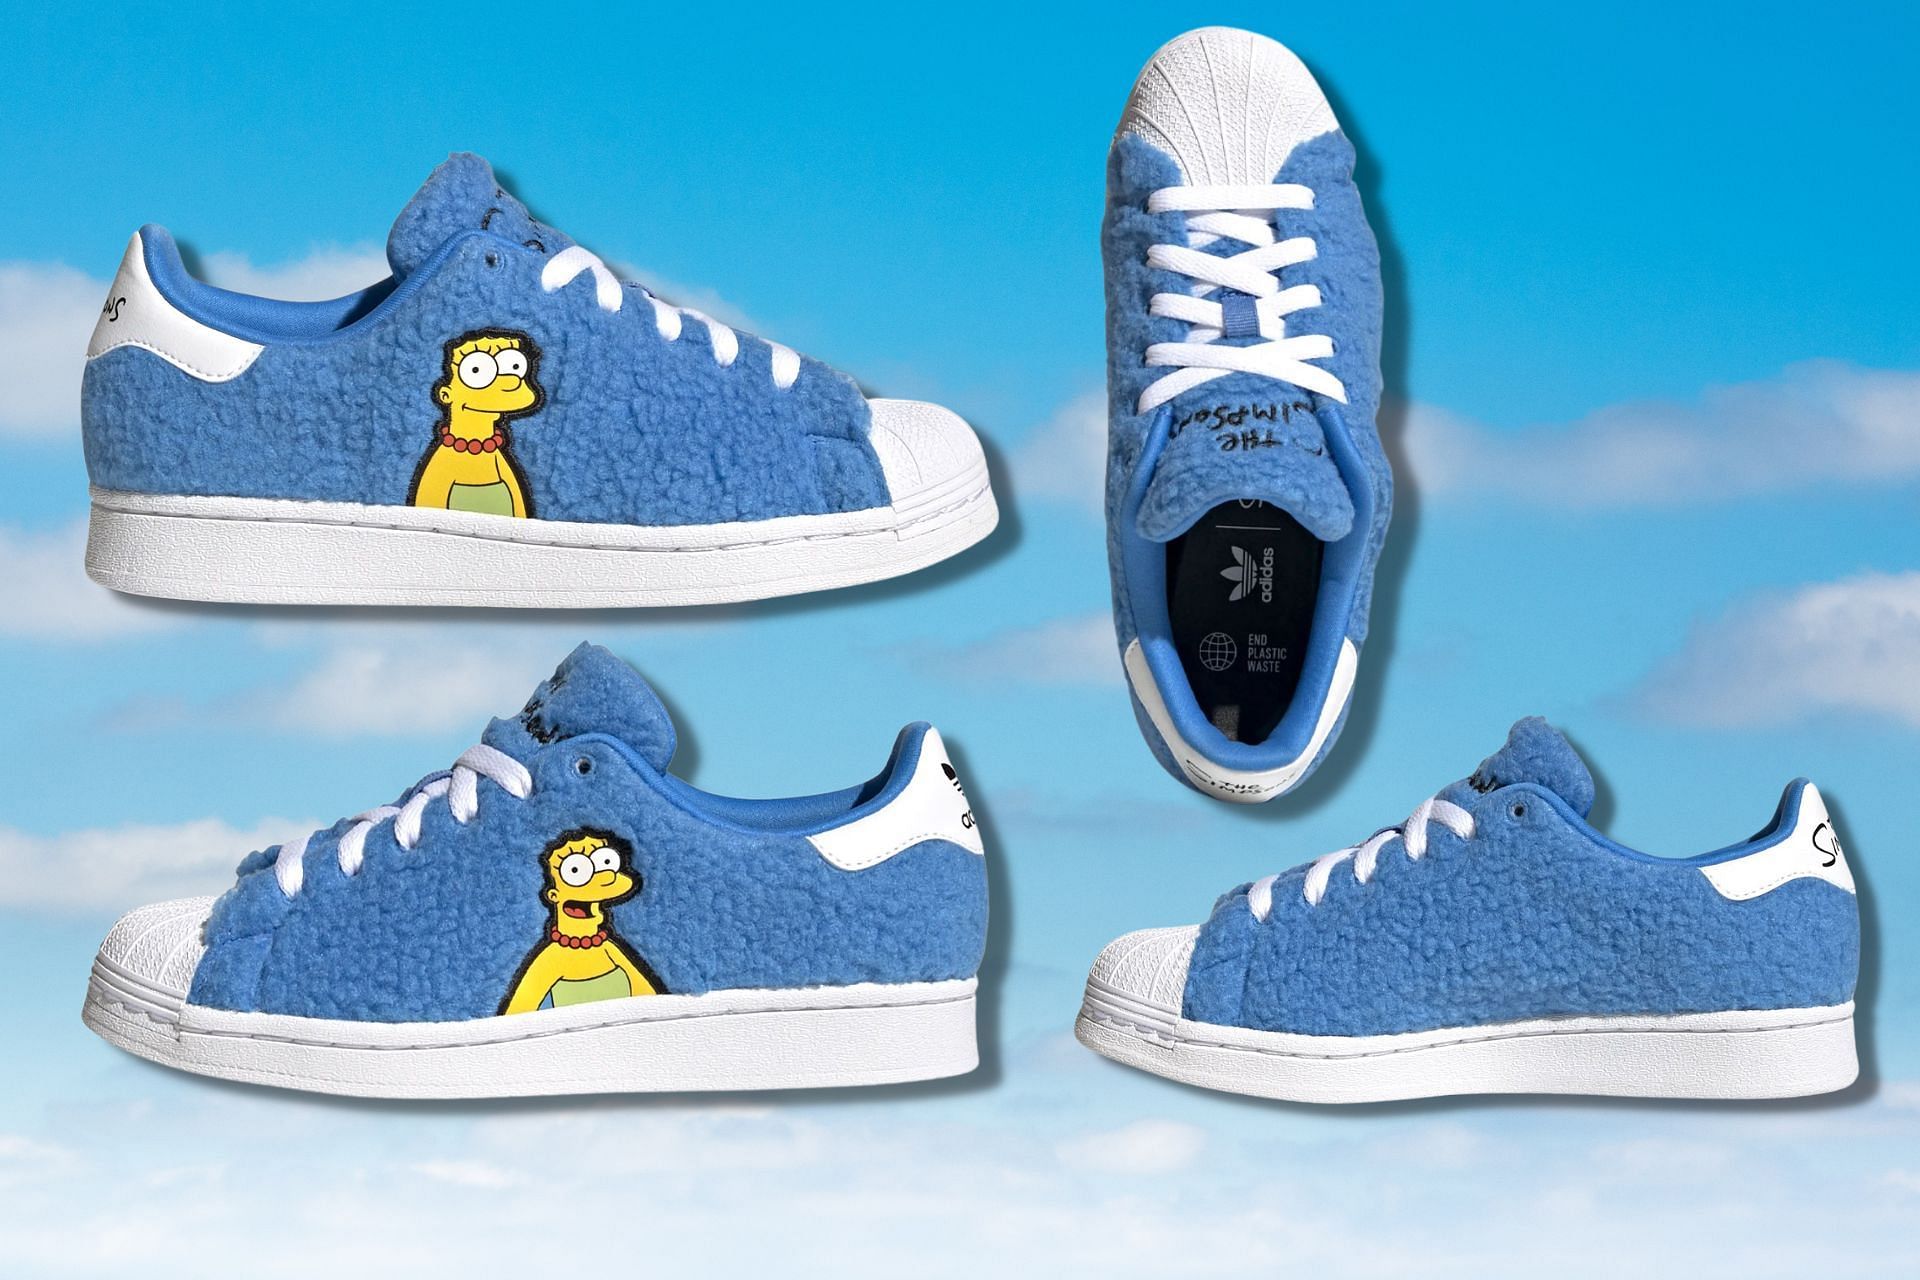 Upcoming The Simpsons x Adidas Superstar sneakers featuring Marge Simpsons (Image via Adidas)